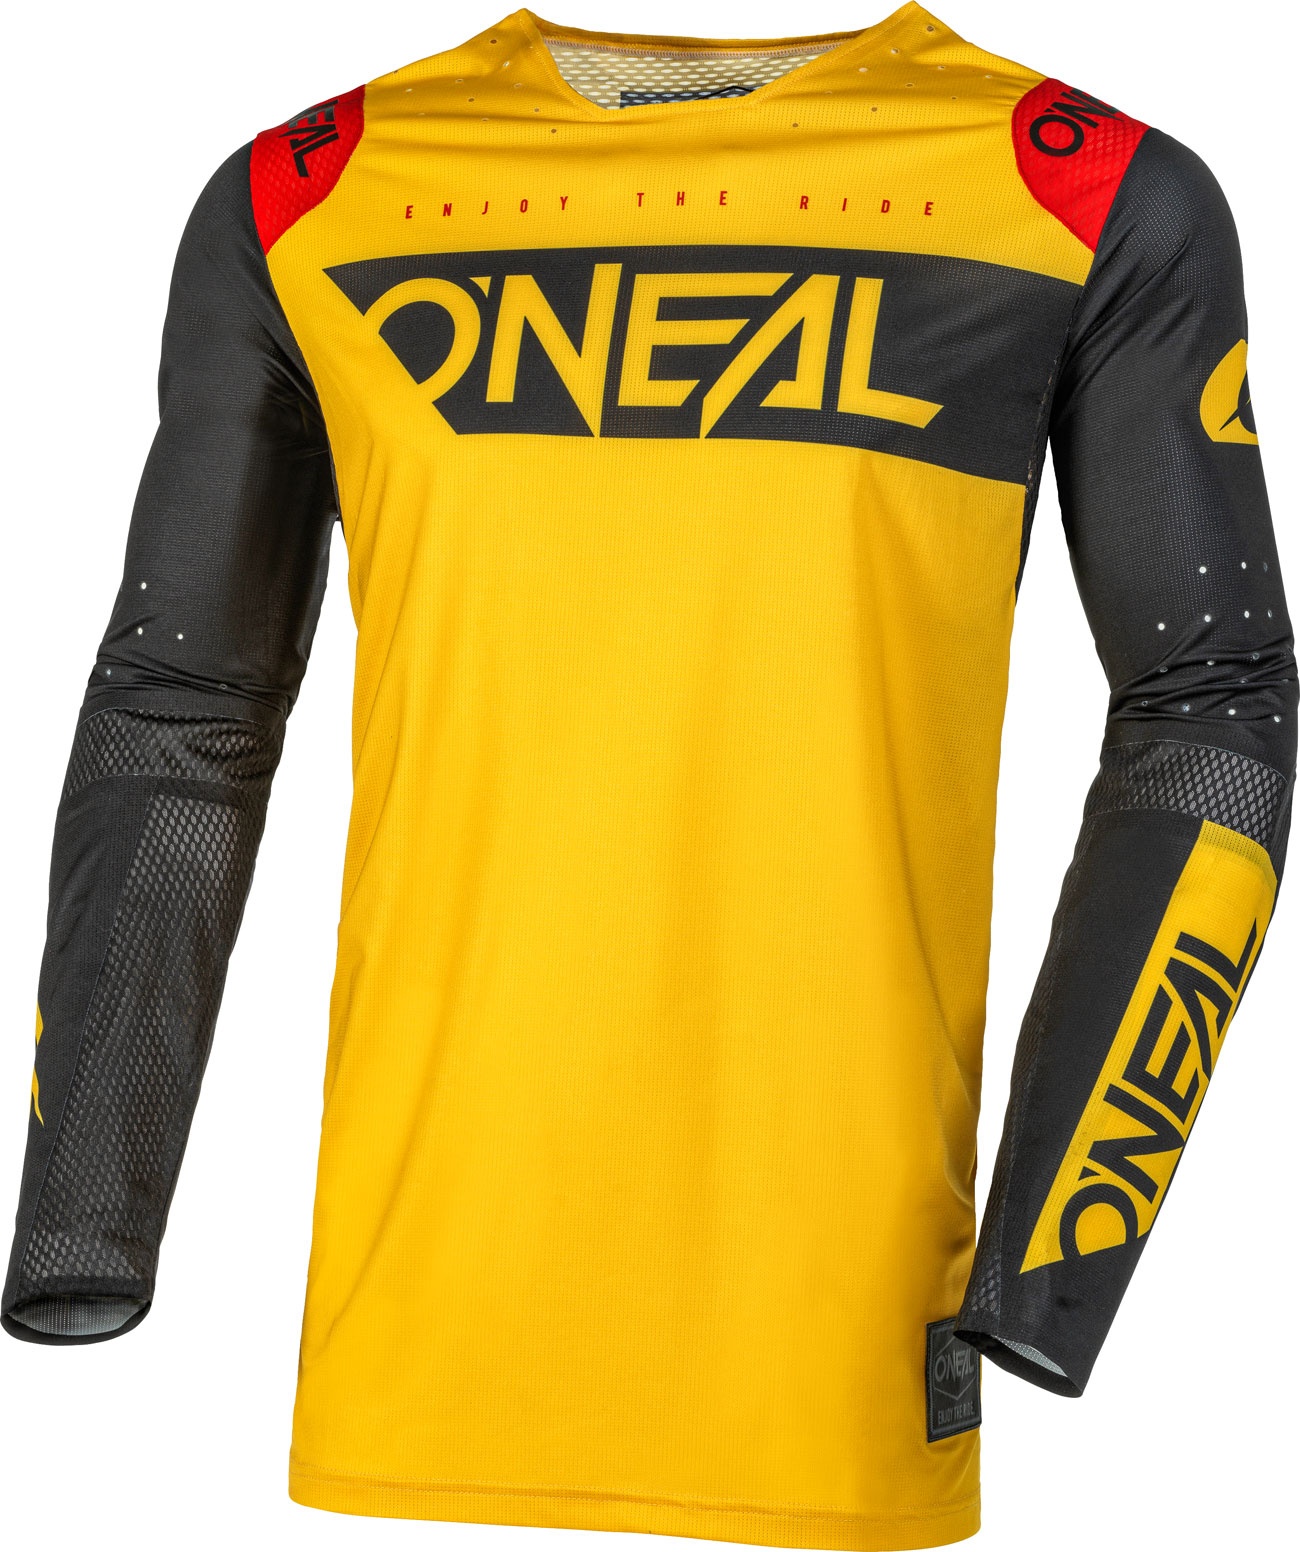 ONeal Prodigy Five-Two S23, jersey - Jaune/Noir - XXL